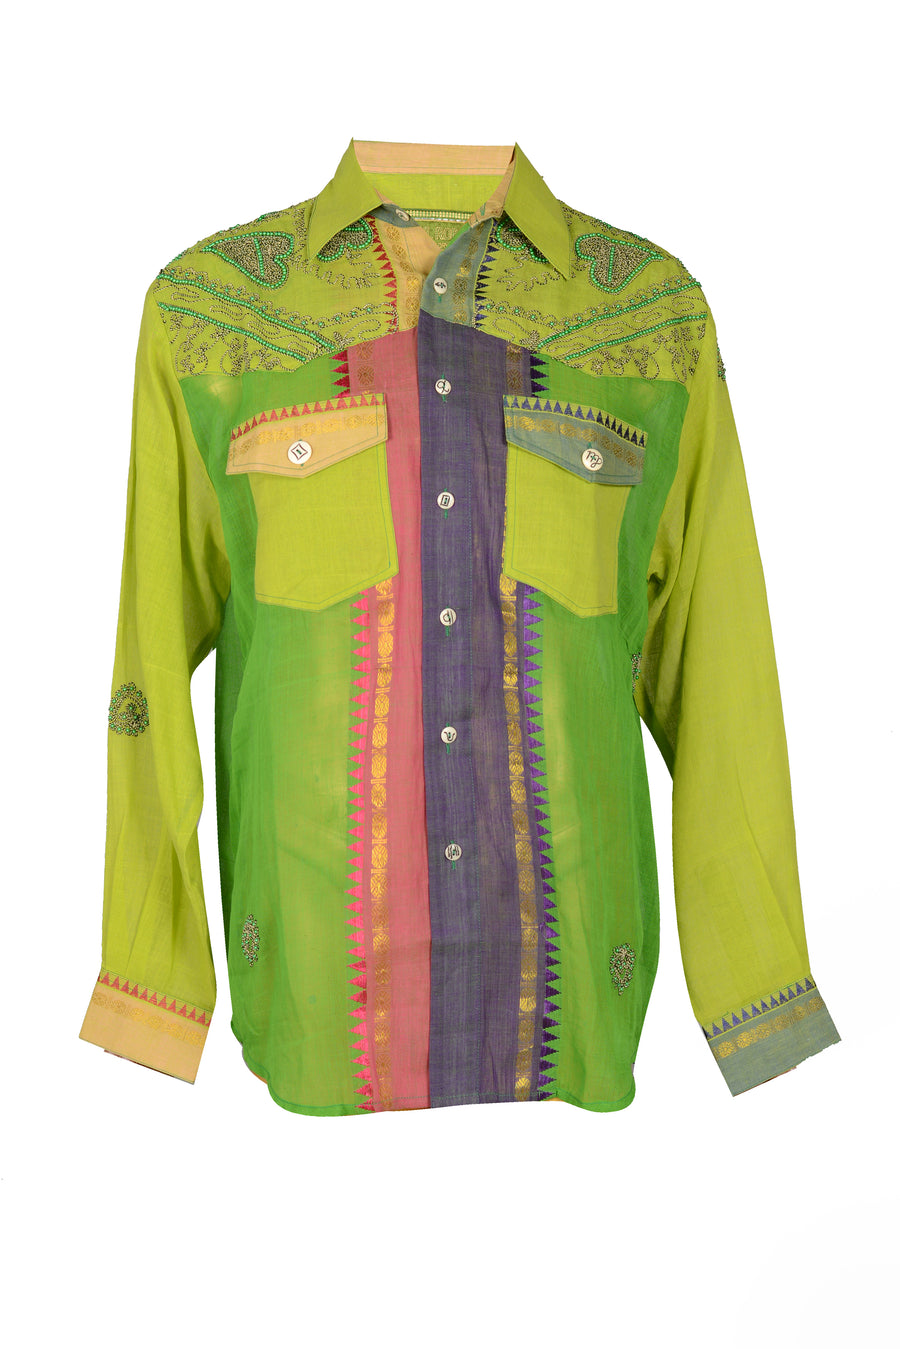 Lewin - Cotton Hand Woven And Hand Embroidered Lewin Cowboy Shirt With Hand Carved Bone Buttons (7302727729348)